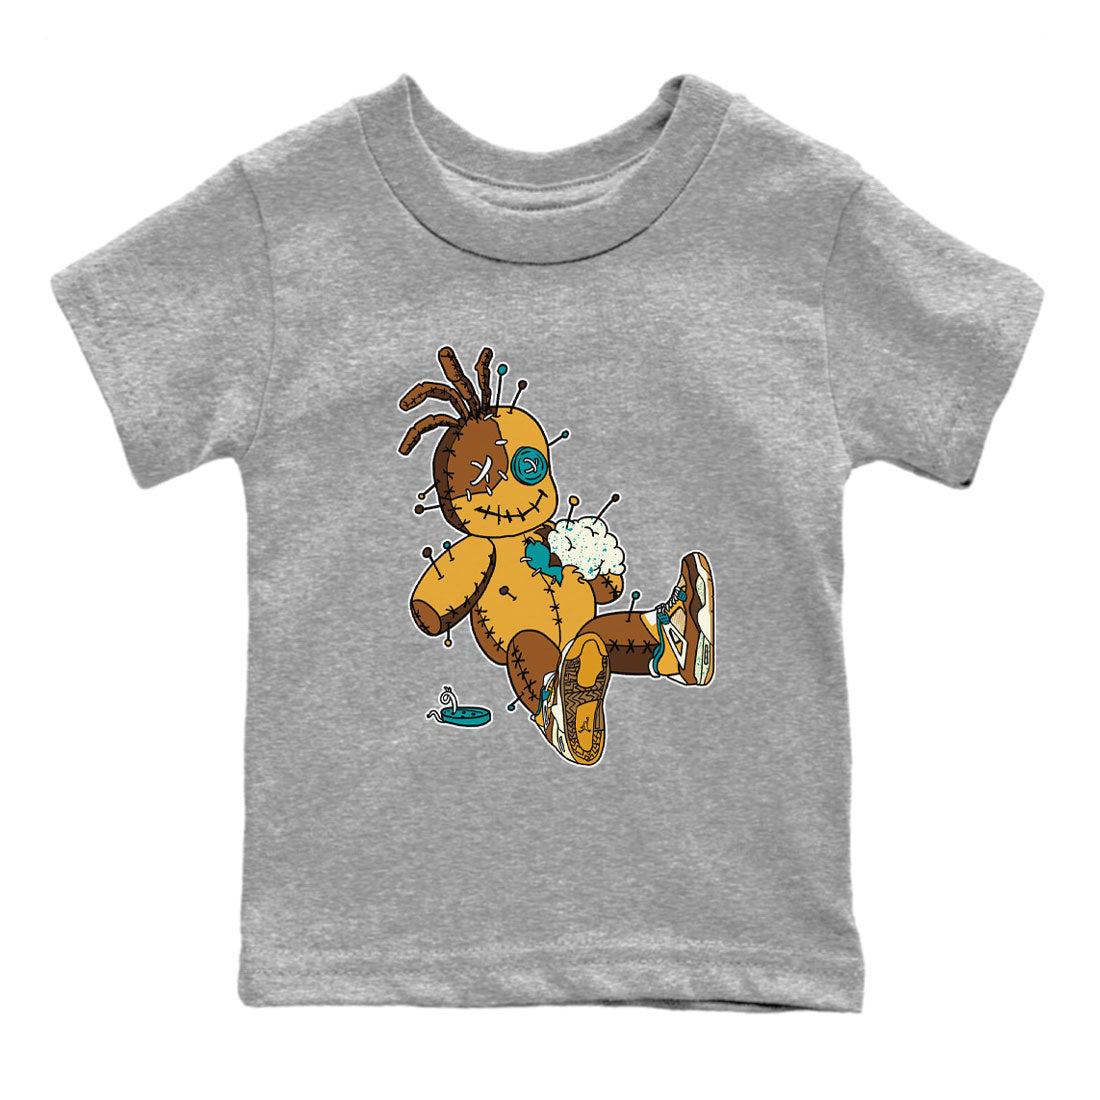 4s Cacao Wow shirt to match jordans Voodoo Doll sneaker tees Air Jordan 4 Cacao Wow SNRT Sneaker Release Tees Baby Toddler Heather Grey 2 T-Shirt